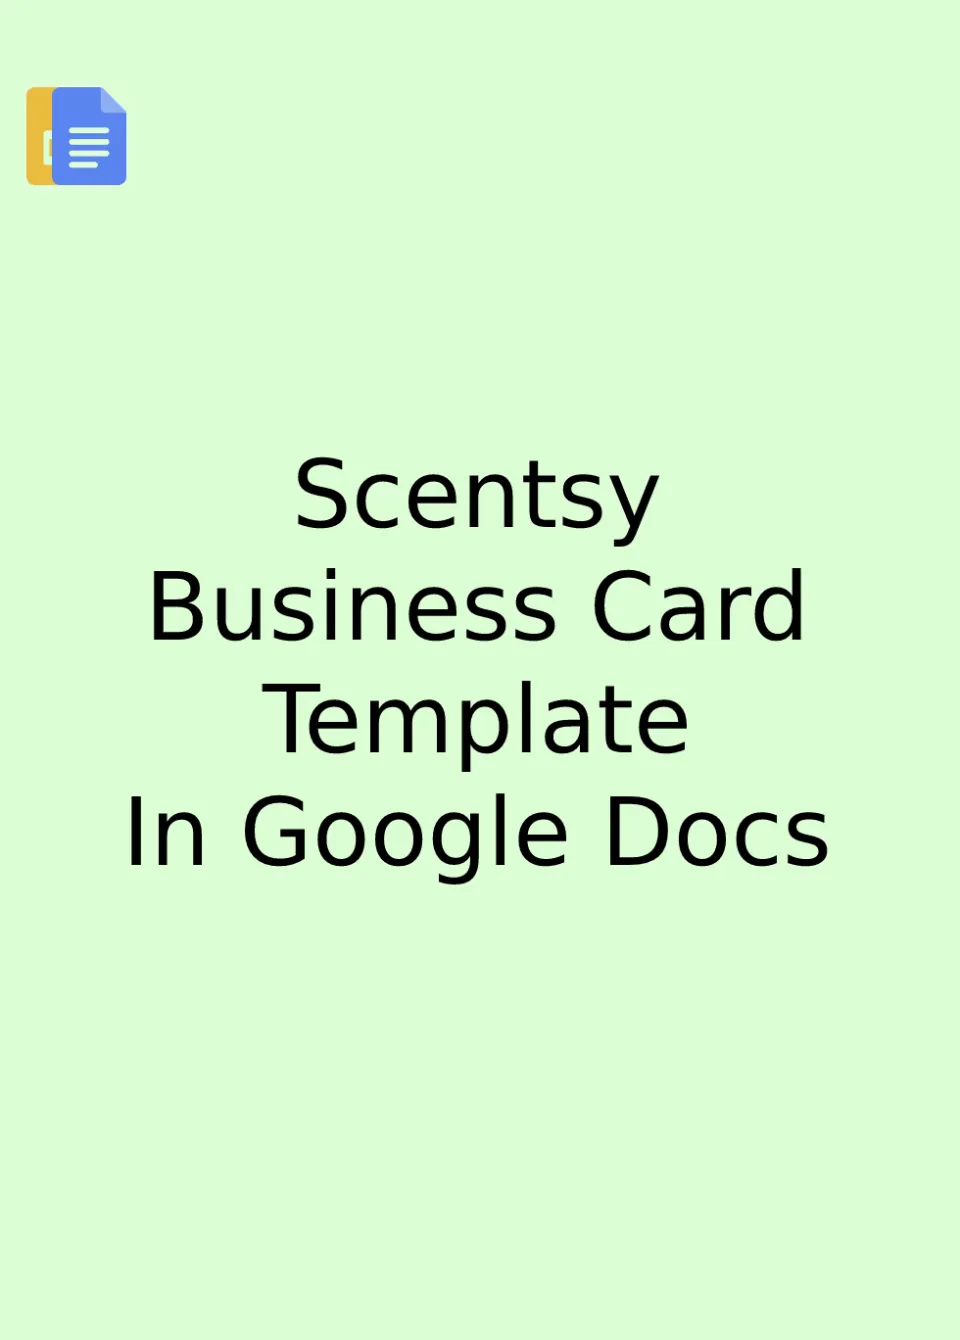 Scentsy Business Card Template Google Docs